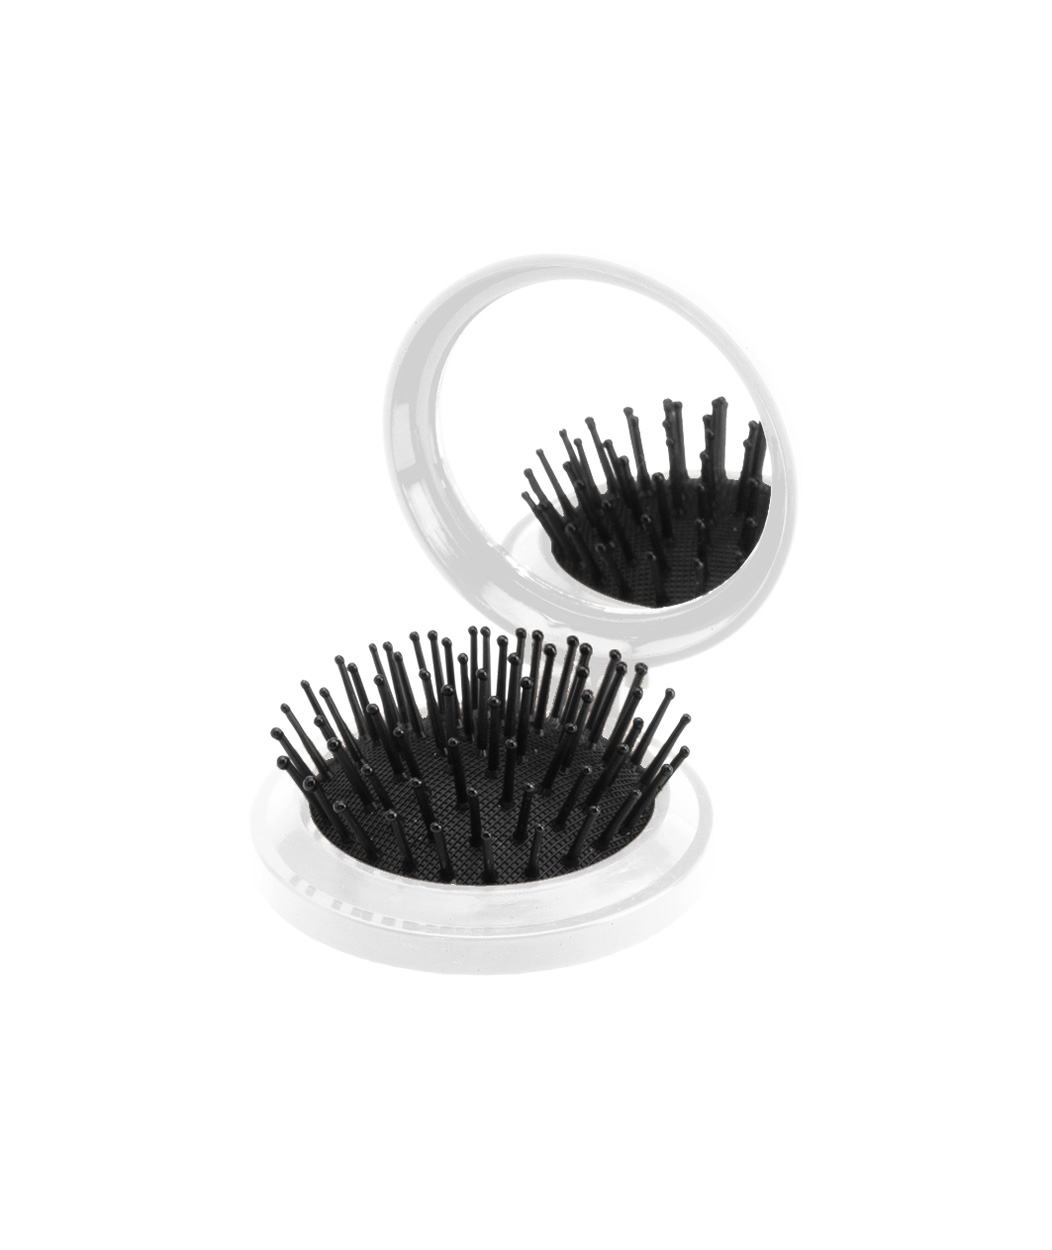 Plastic foldable hairbrush GLANCE with mirror